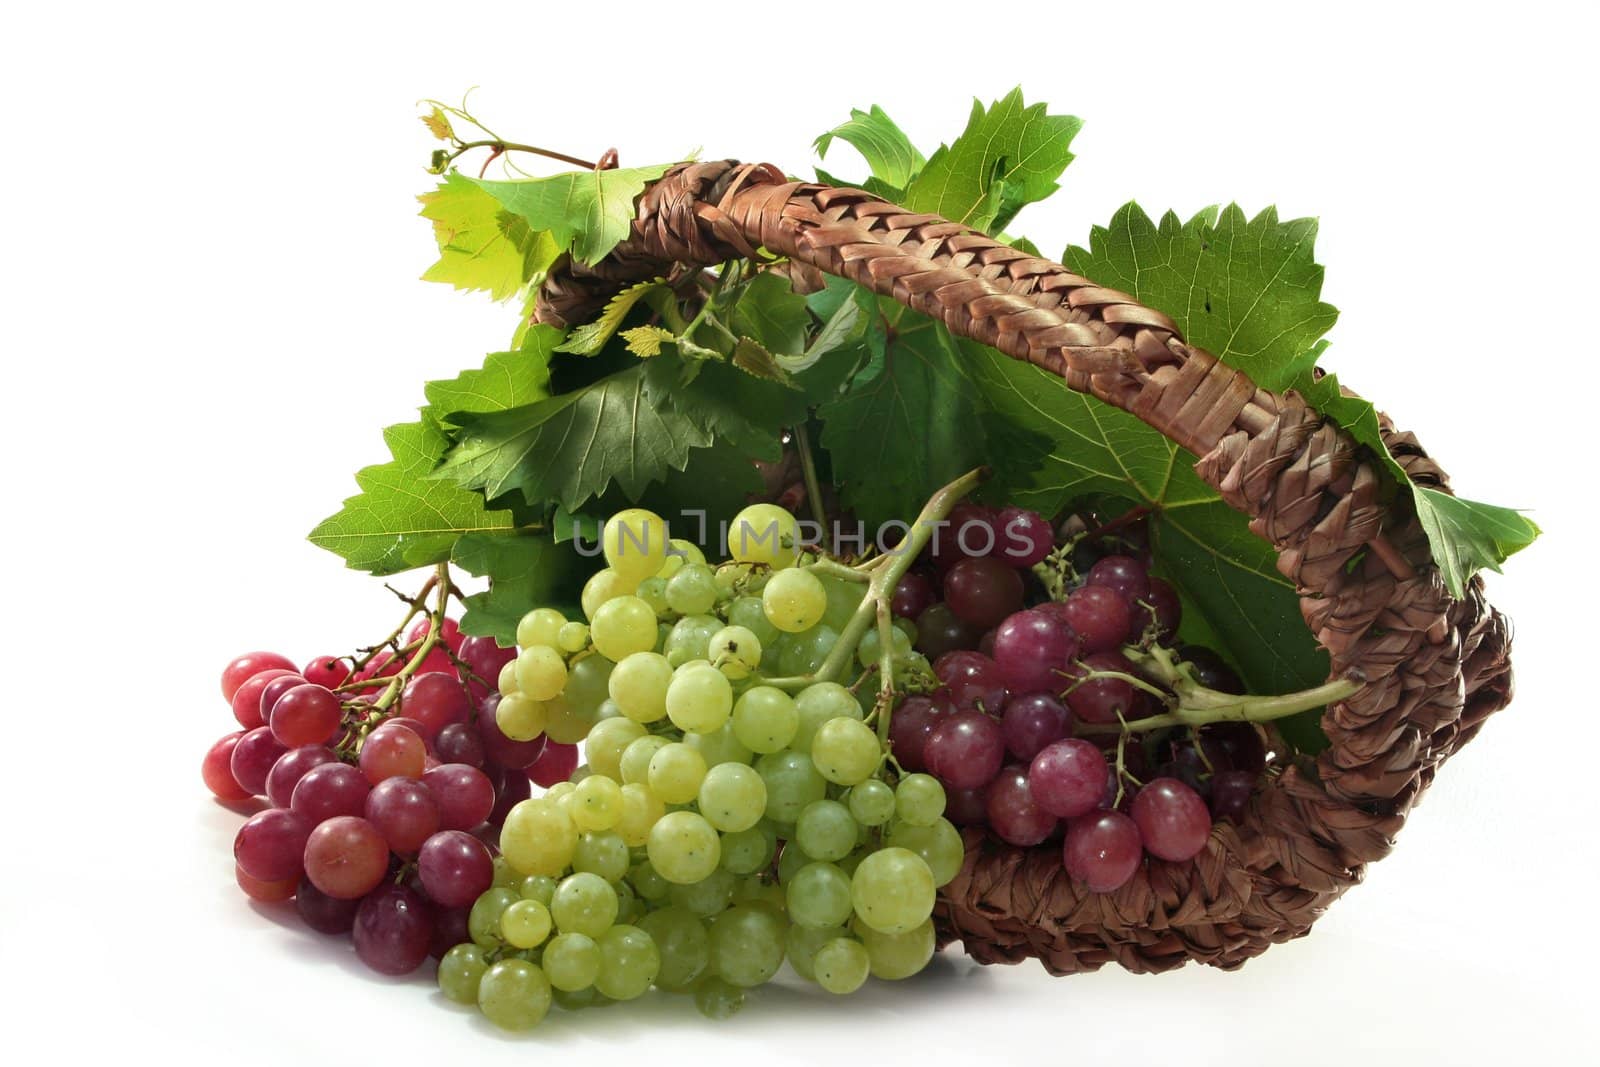 Grapes and vine leaves in a basket